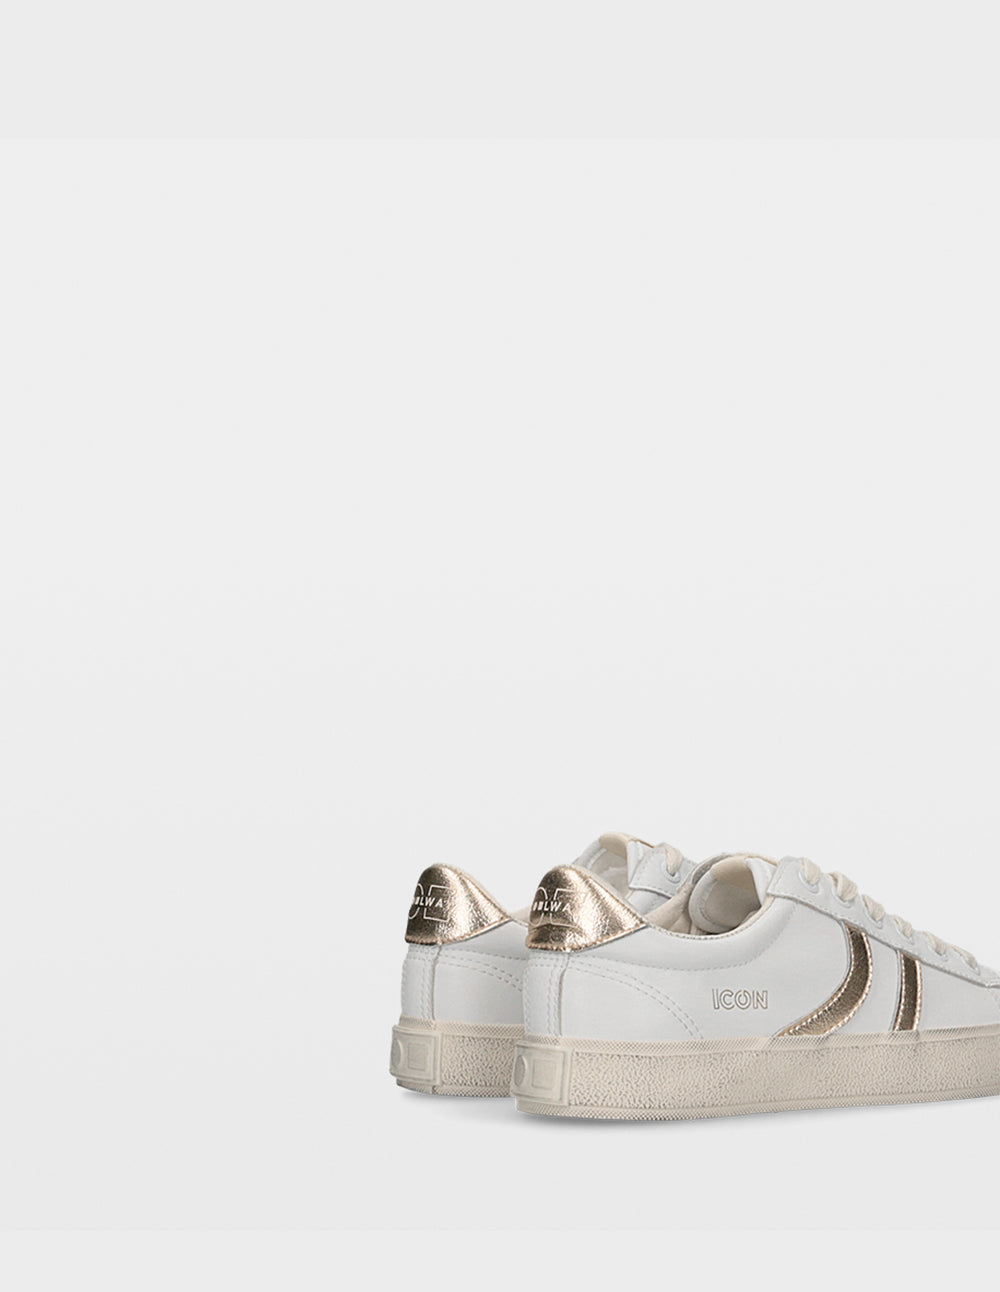 ICON-NOW WHITE/GOLD LEATHER MUJER